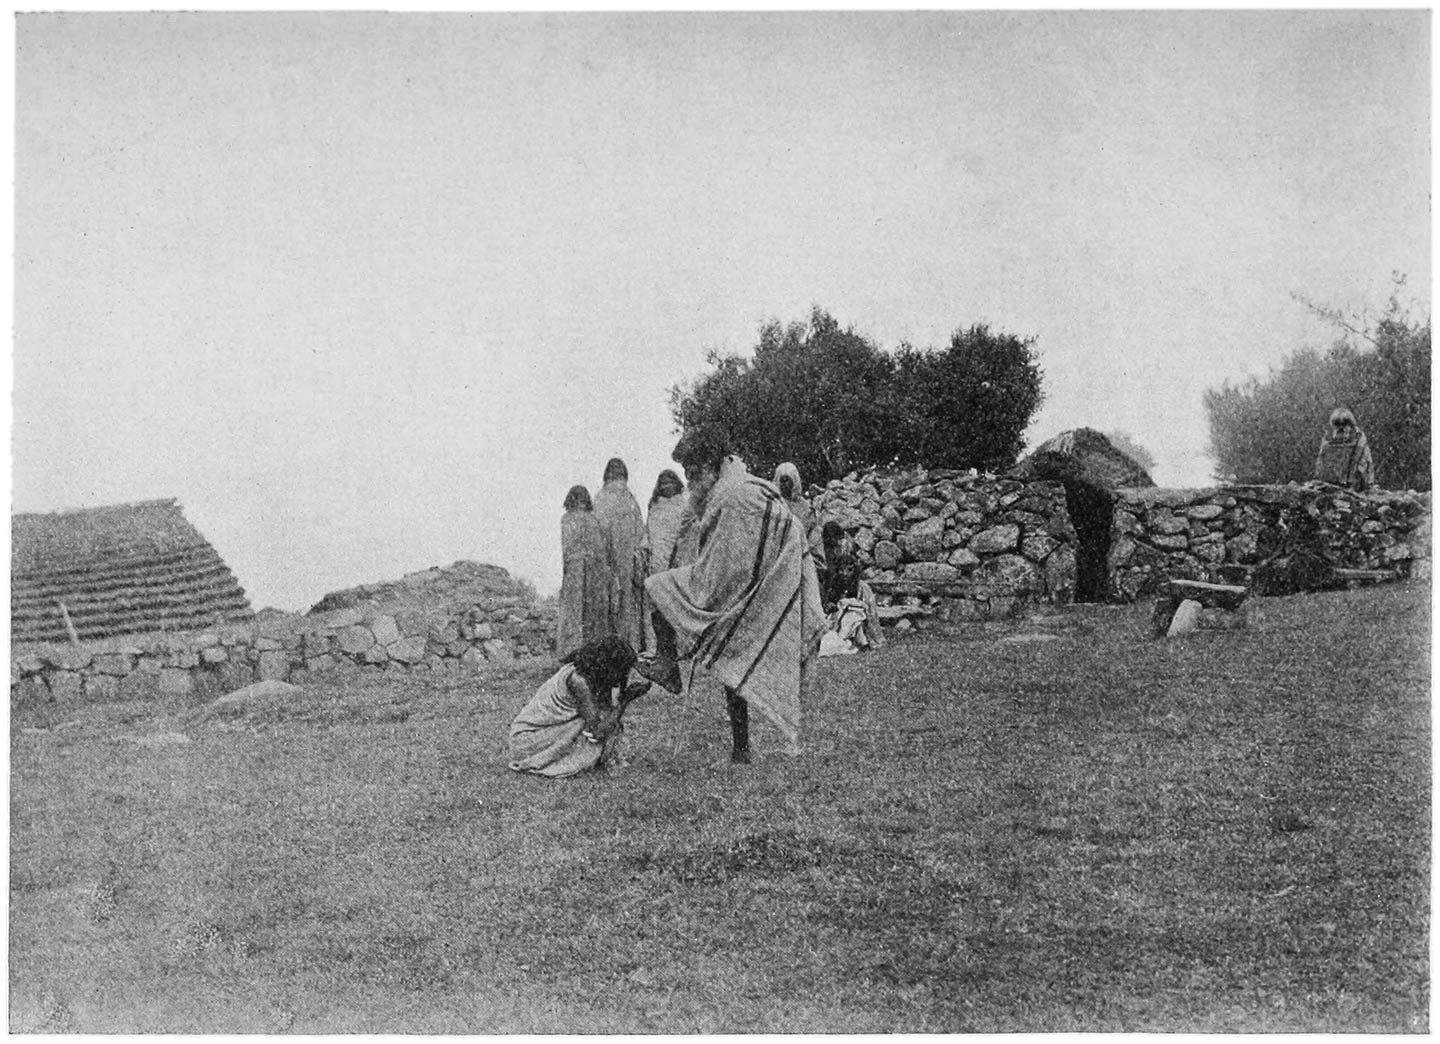 FIG. 12.—THE ‘KALMELPUDITHTI’ SALUTATION TAKING PLACE AT THE VILLAGE OF NÒDRS. ON THE LEFT IS THE HOUSE; ON THE RIGHT IS THE LESS IMPORTANT DAIRY OF THE VILLAGE (THE ‘TARVALI’), AND IN FRONT OF IT IS THE STONE CALLED ‘MENKARS.’